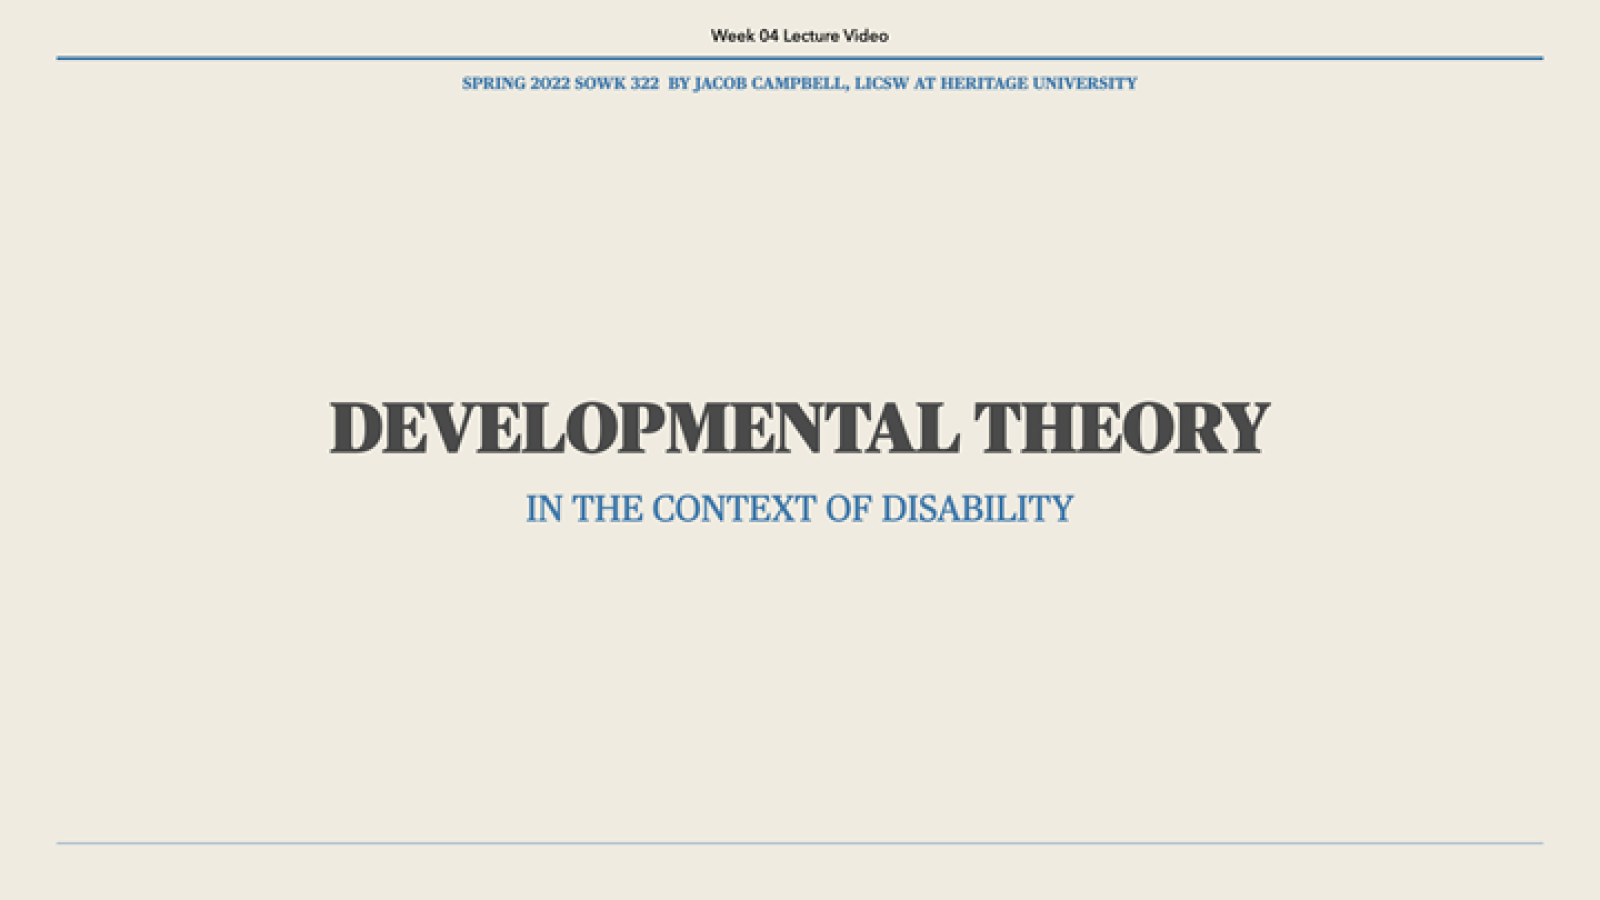 SOWK 322 Week 04 - Developmental Theory in the Context of Disability